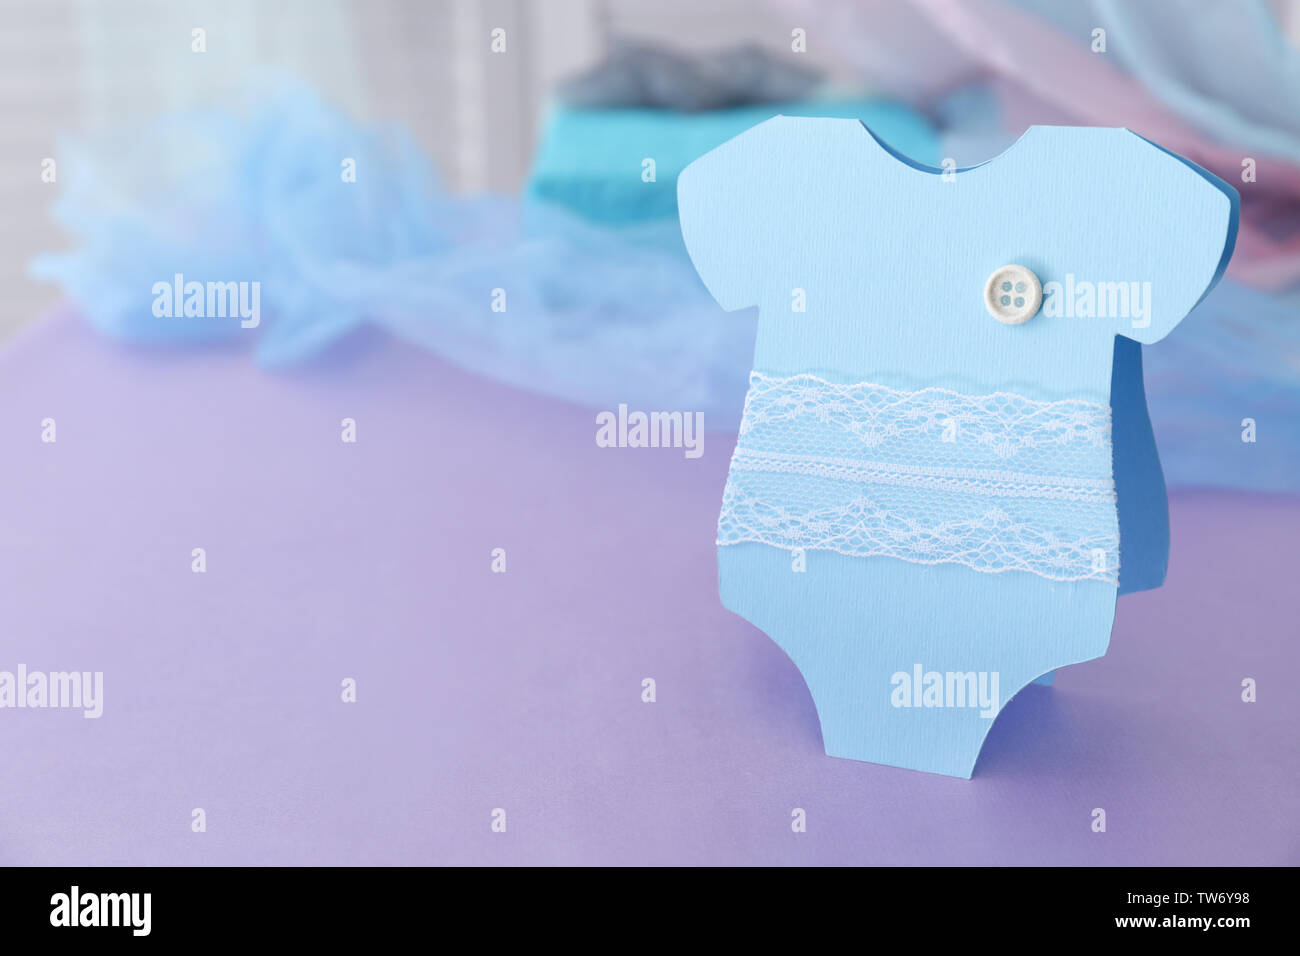 baby-shower-thank-you-card-on-table-stock-photo-alamy